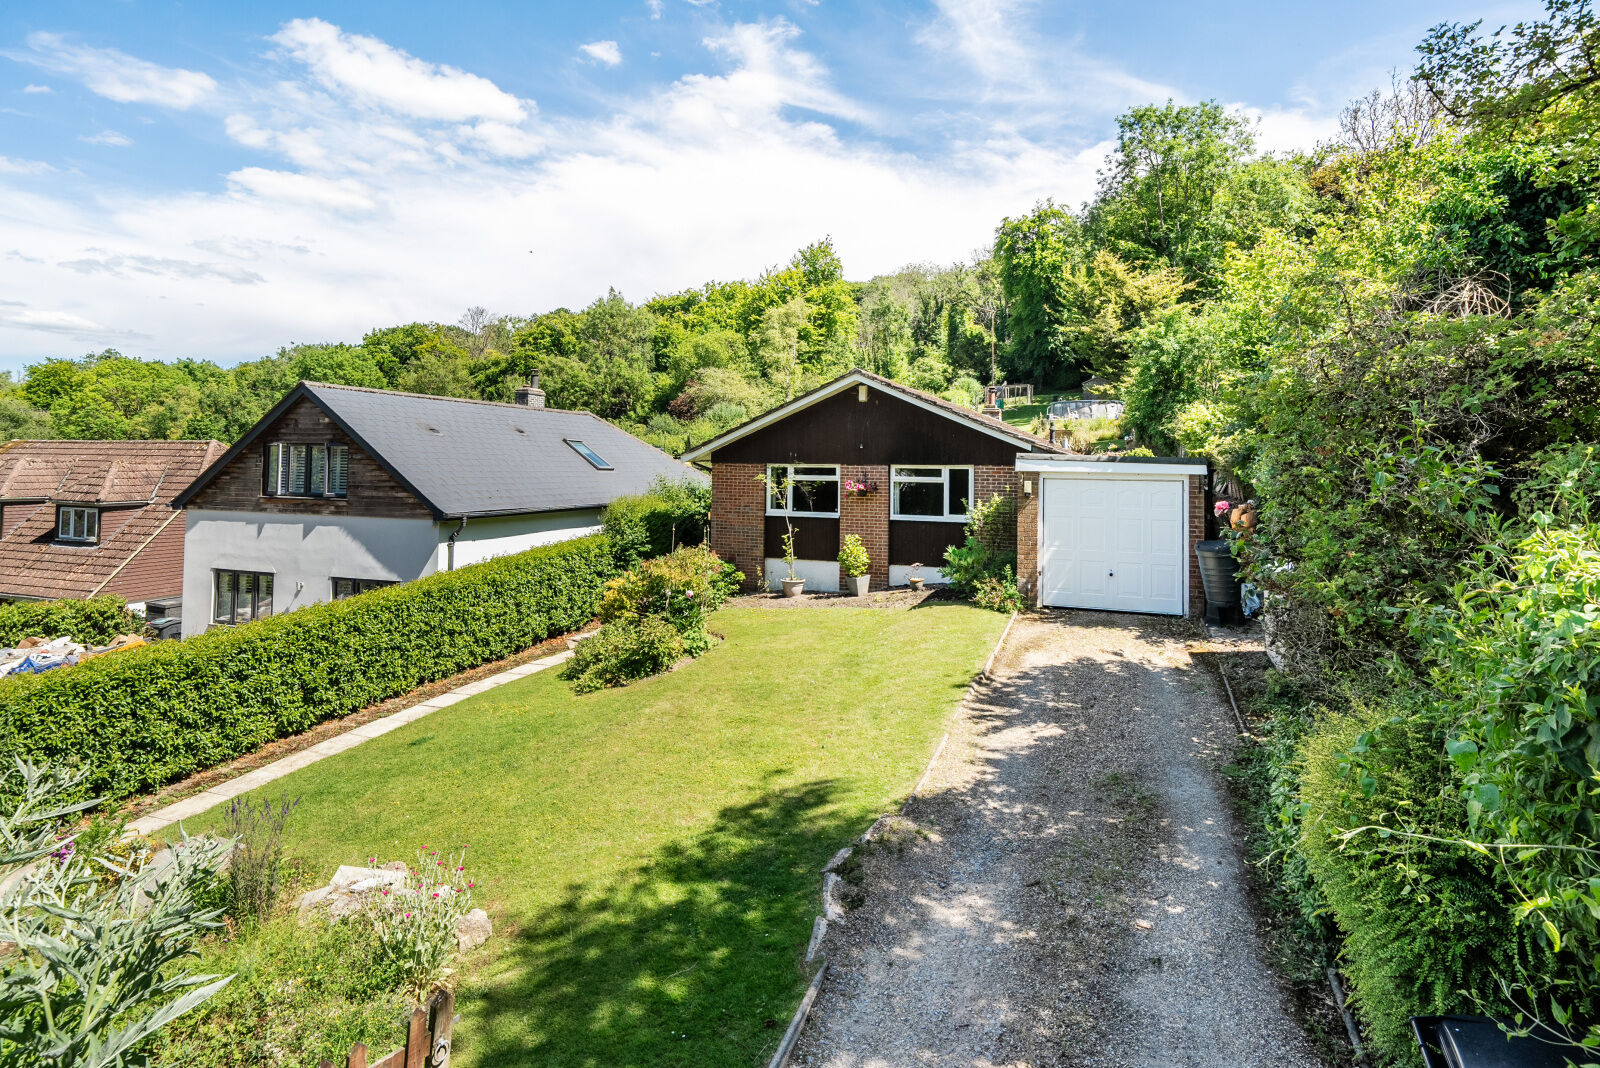 3 bedroom detached house for sale The Coombe, Streatley, RG8, main image